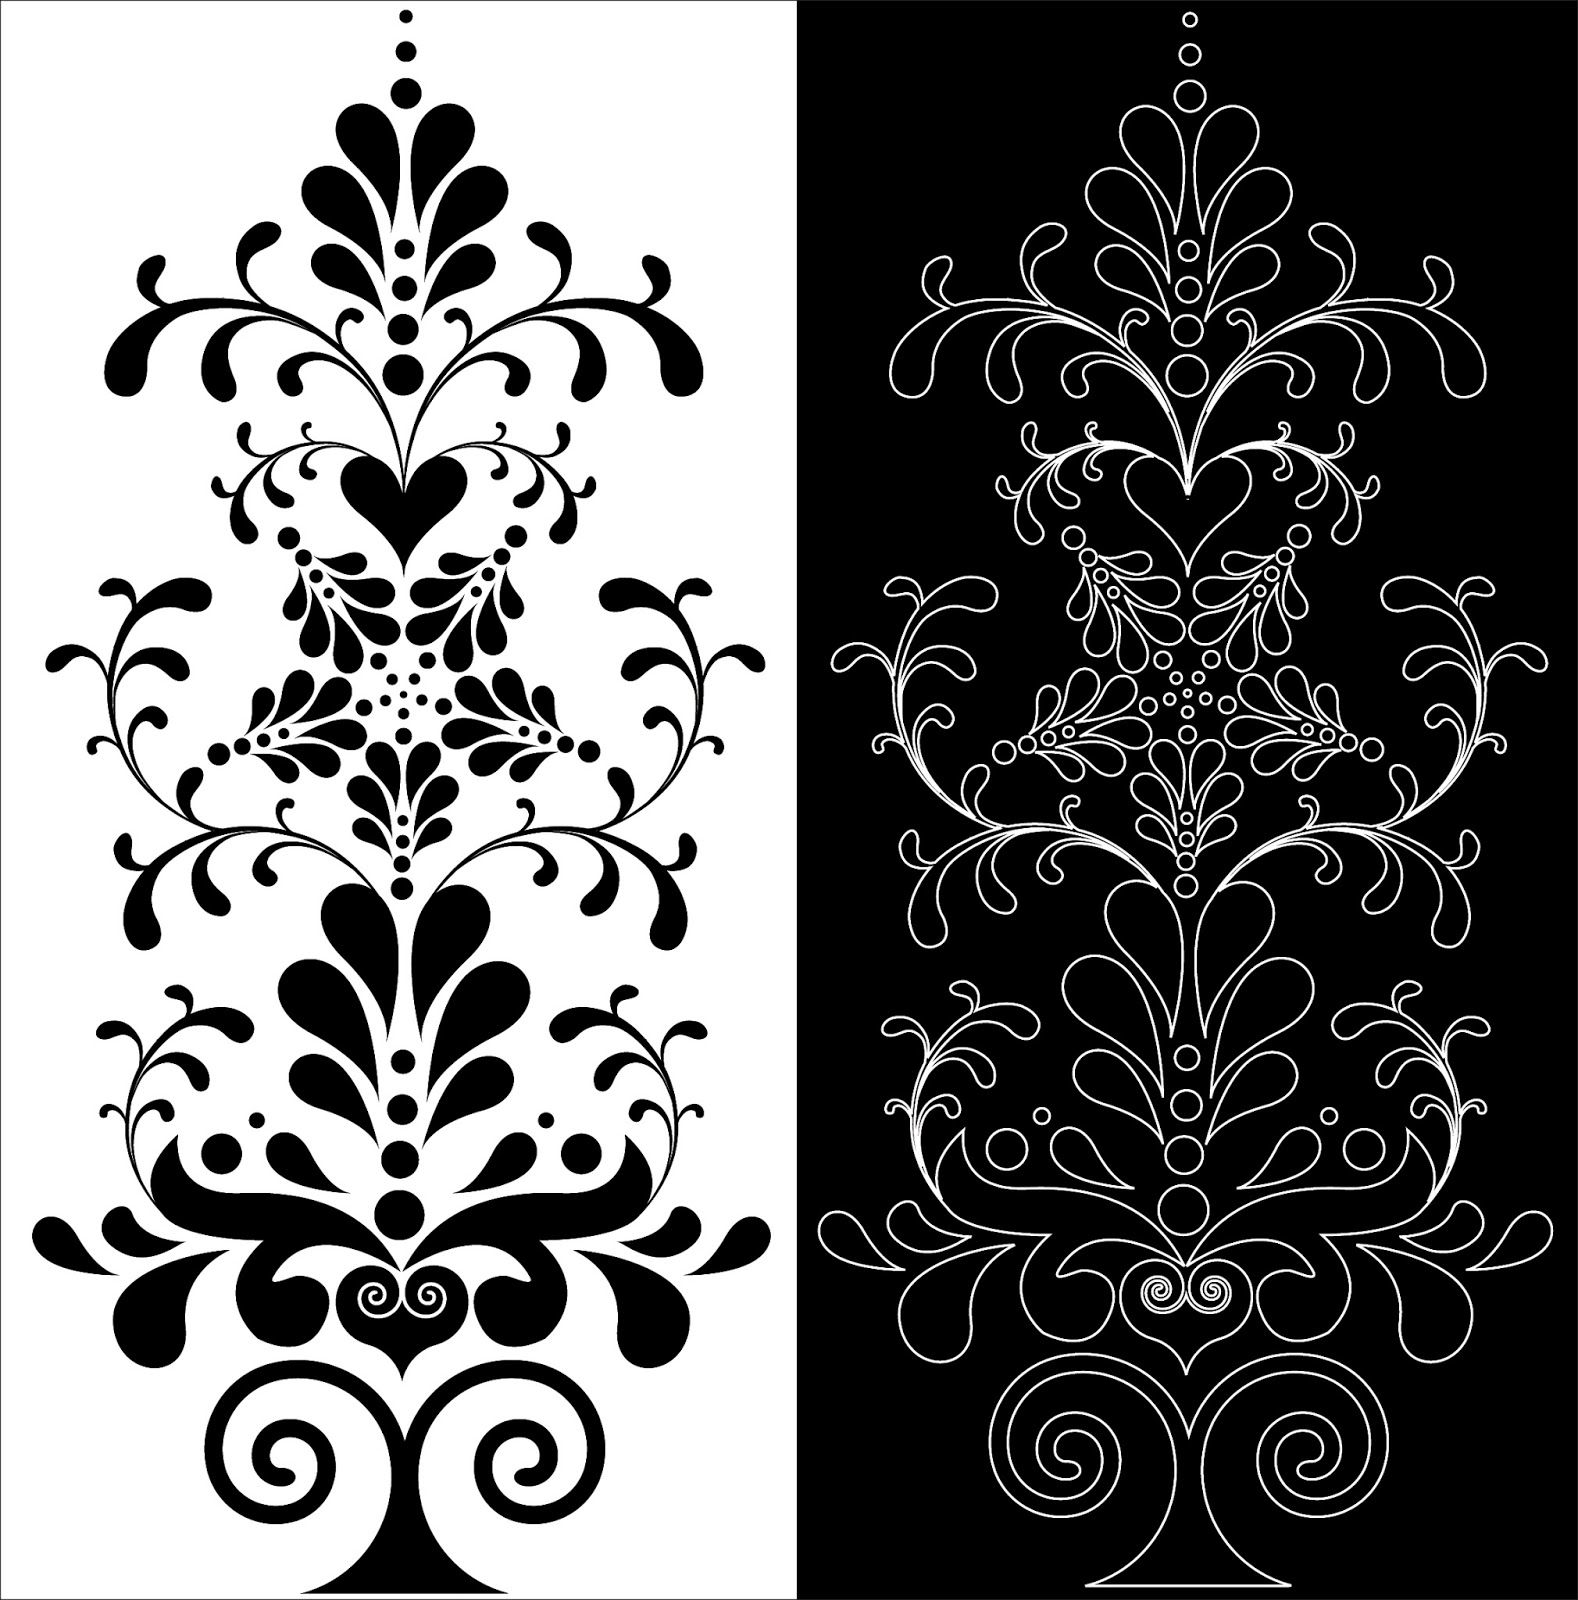 Decorative Floral Pattern Double Free DXF File